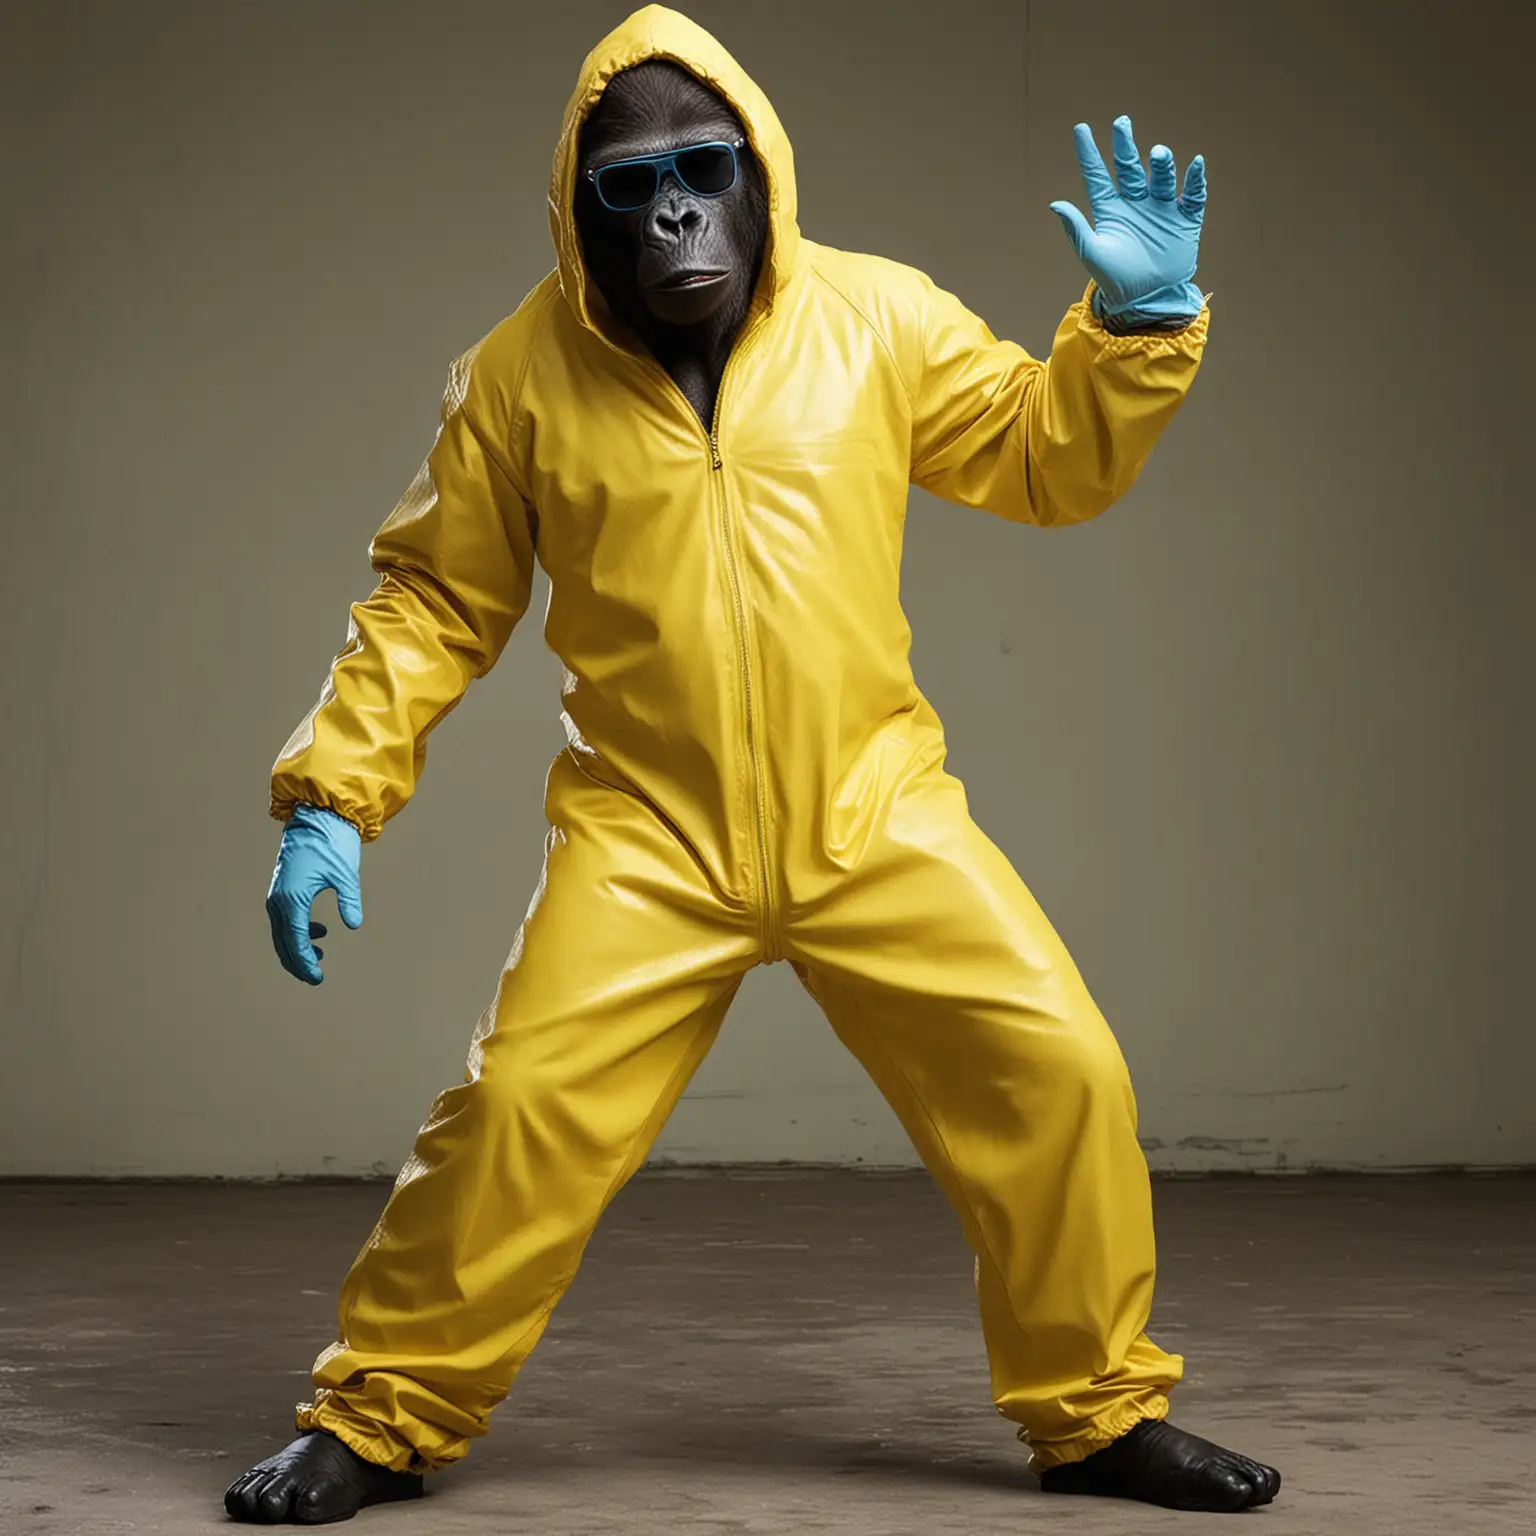 Confident Gorilla in Breaking Bad Jumpsuit Dancing with Style